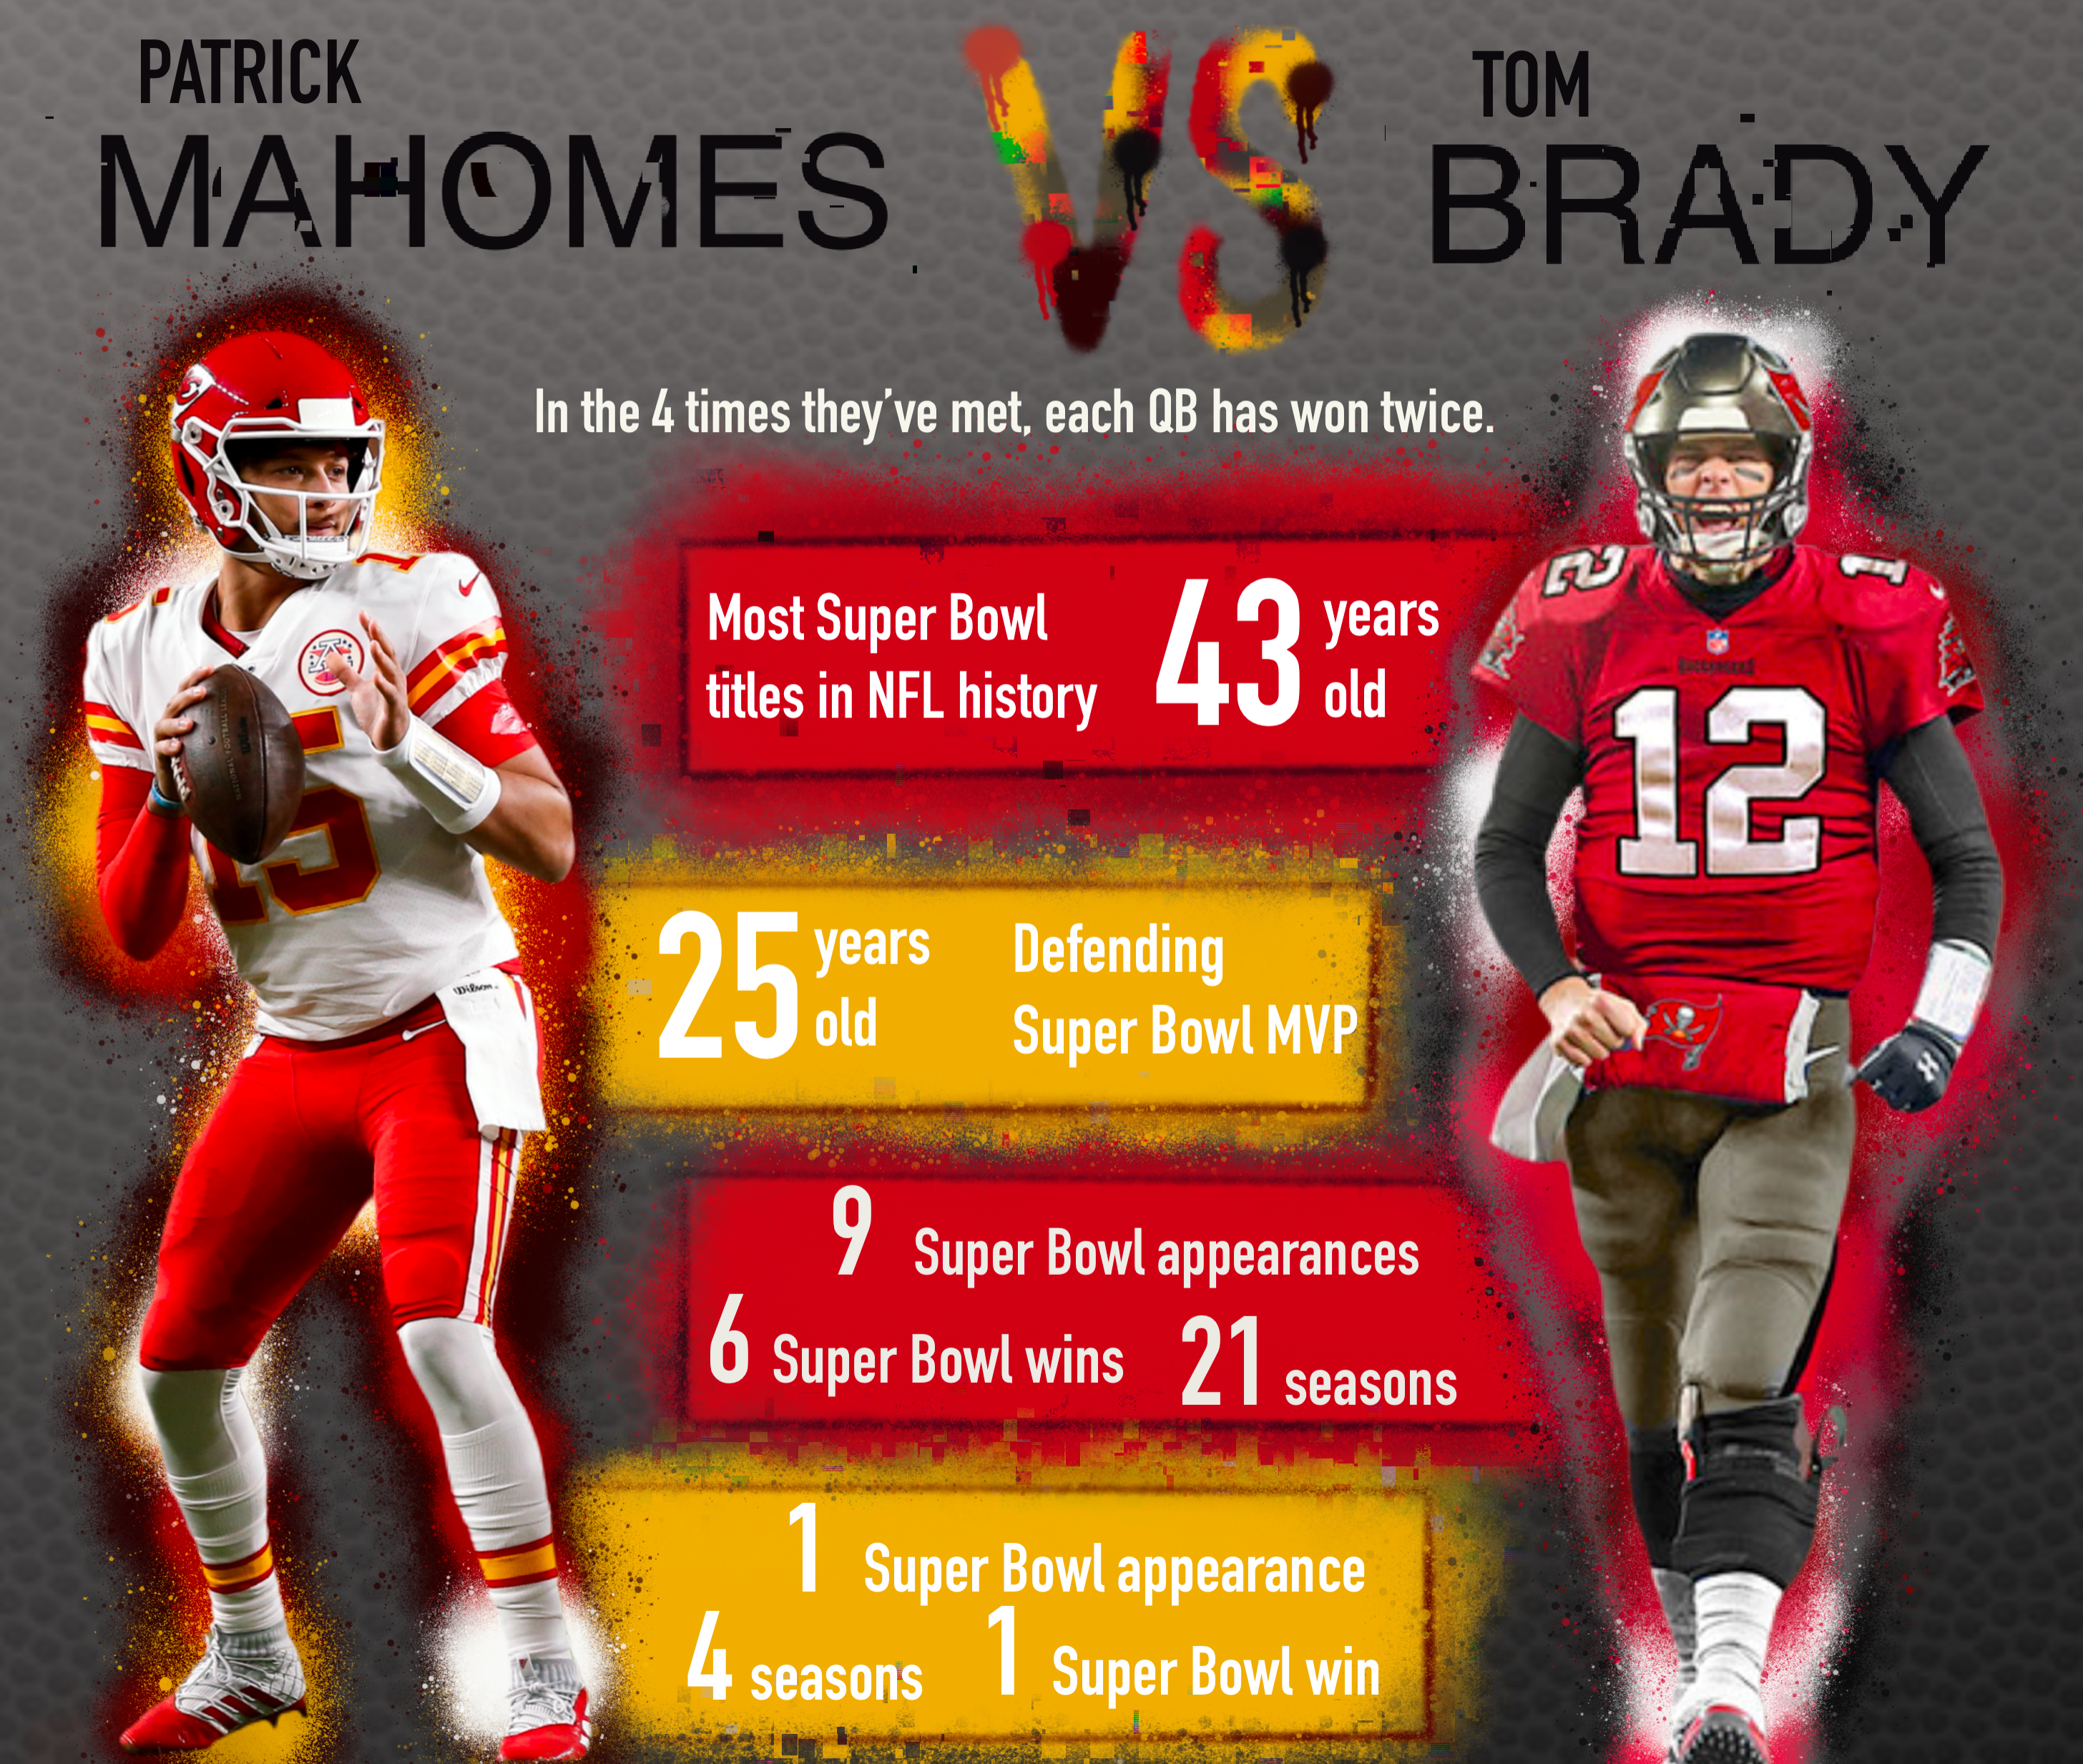 What age were Tom Brady and Patrick Mahomes in first Super Bowl win?